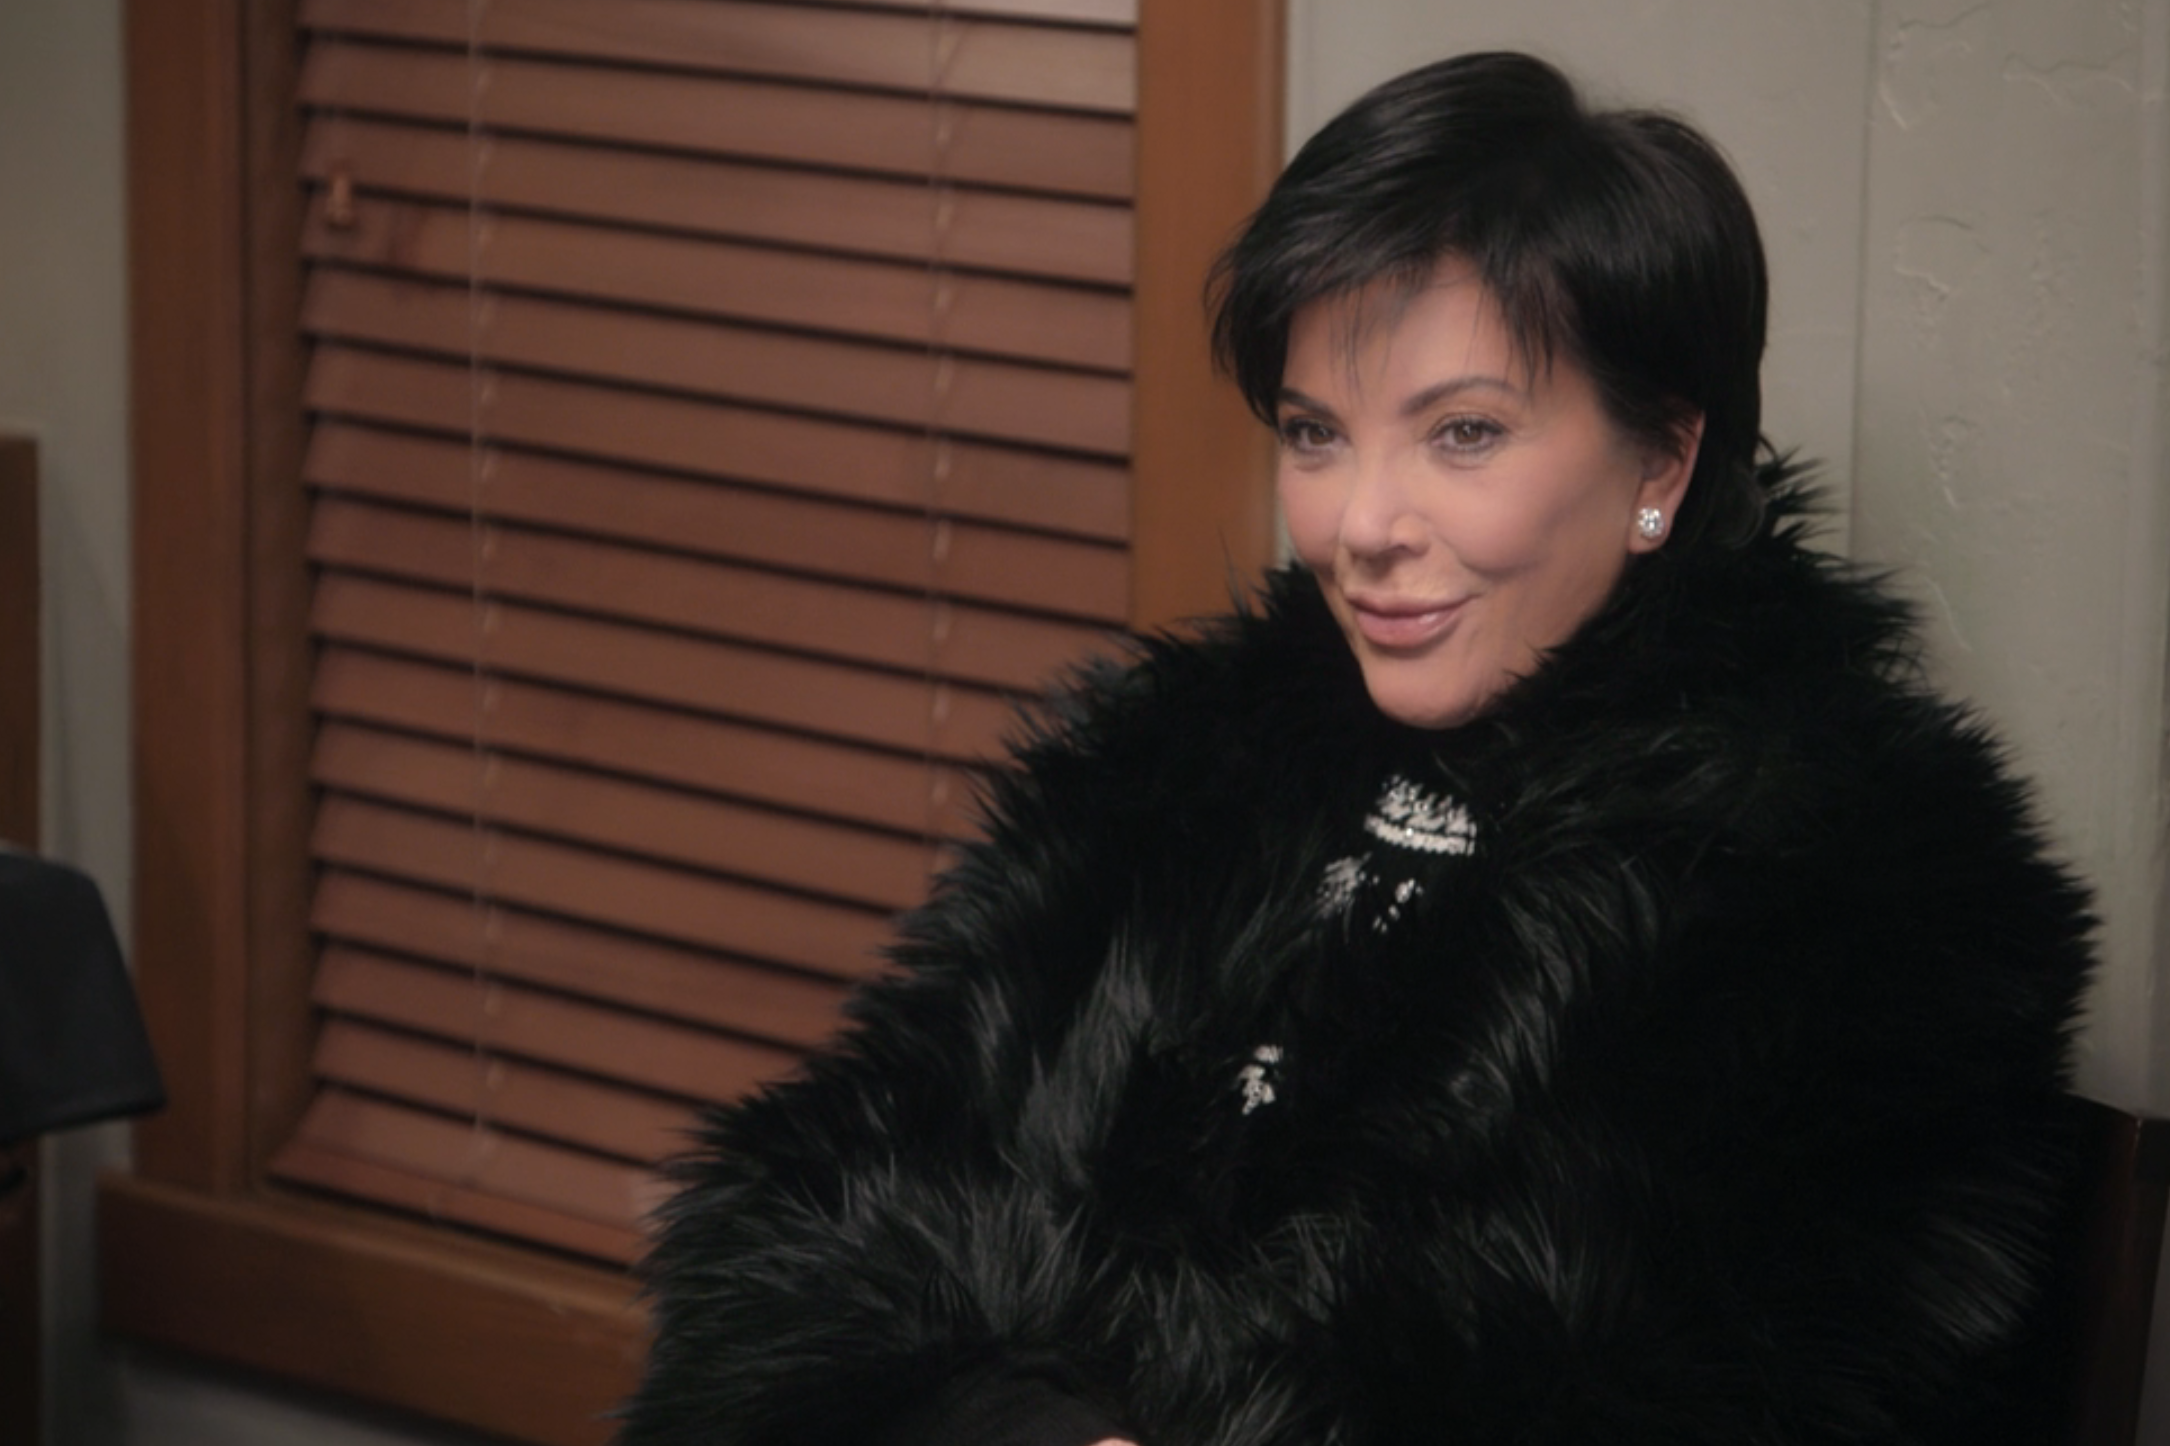 Kris Jenner is seated indoors, wearing a black fur coat with a patterned top underneath. She is smiling and looking slightly off-camera